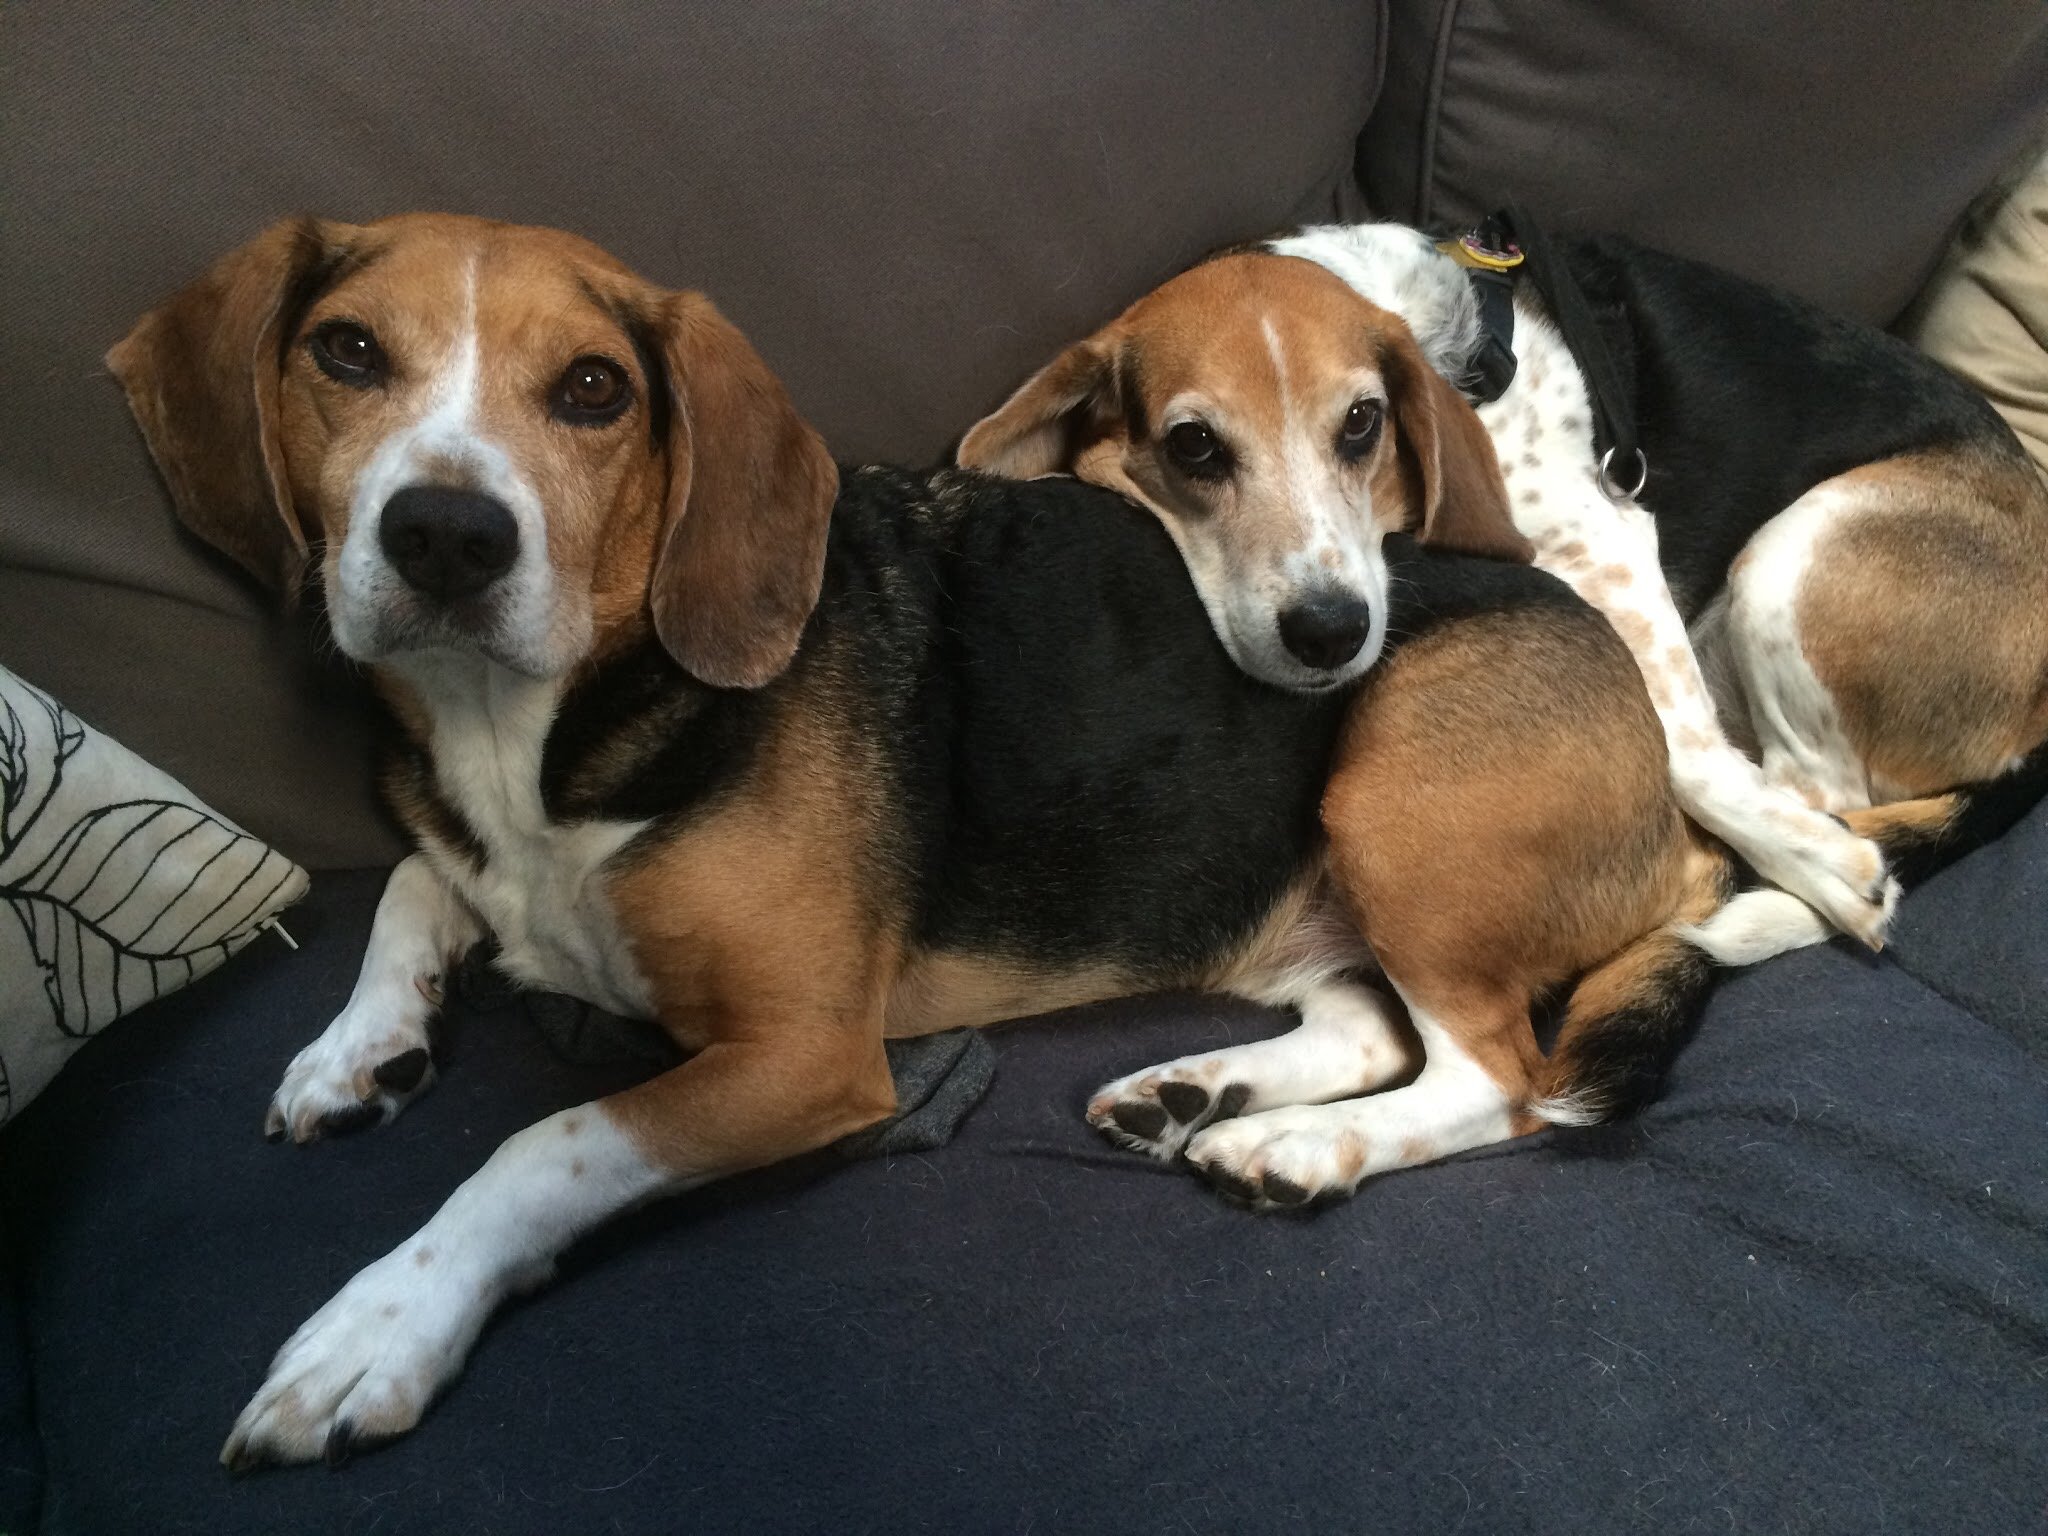 Barley and Ranger, our two favorite Beagles